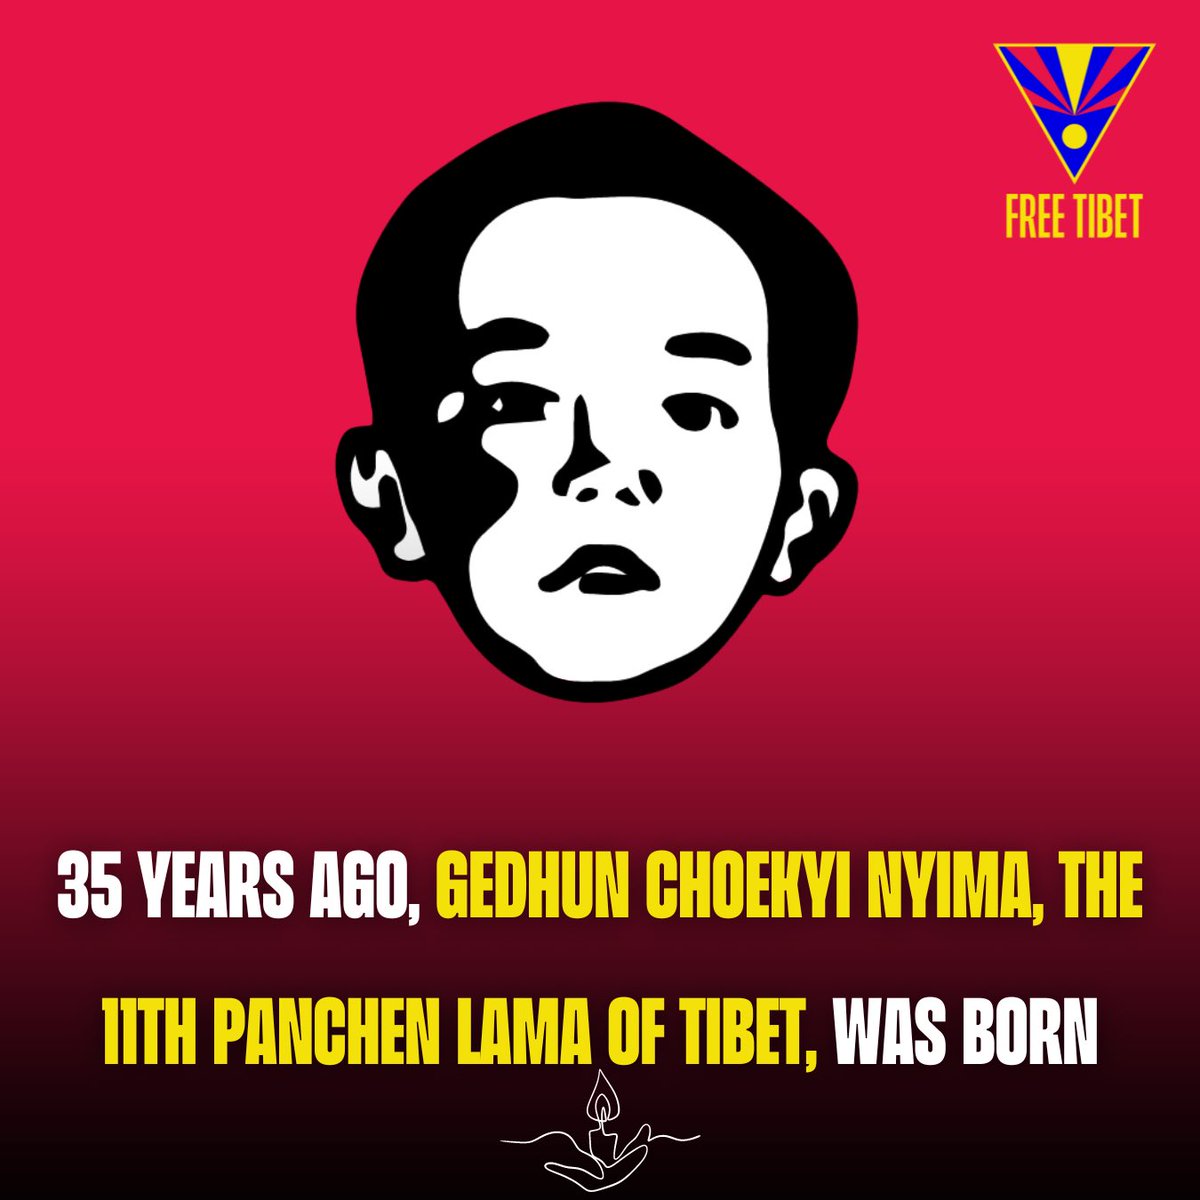 Today, Gedhun Choekyi Nyima, the #PanchenLama turns 35 years old. At the age of six, he was abducted and spent his last 29 birthdays spent under forced disappearance by the Chinese government.